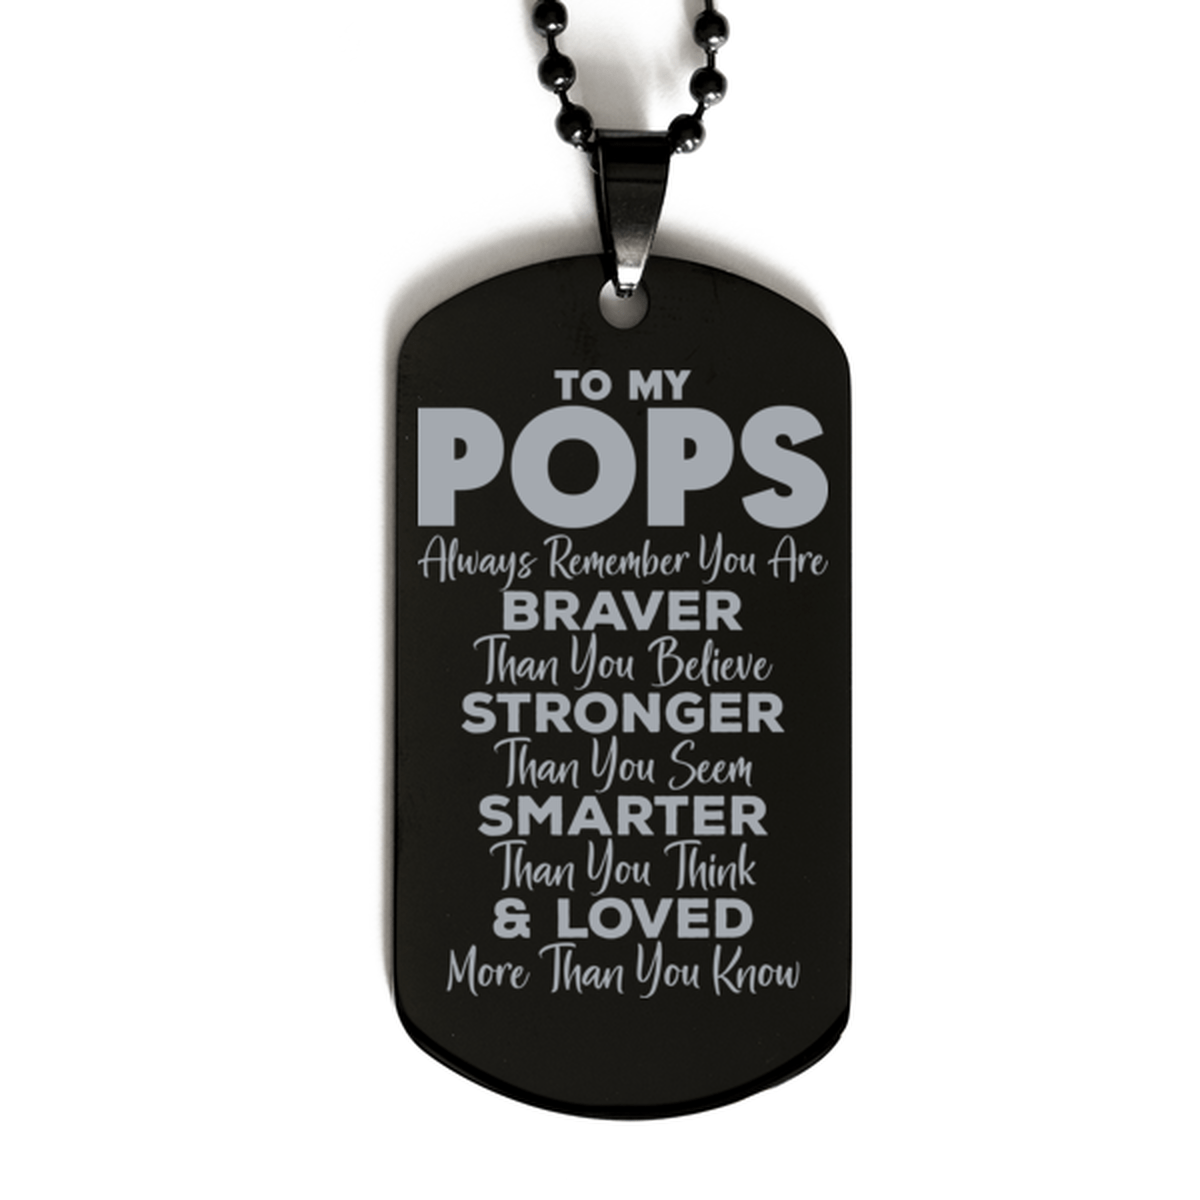 Motivational Pops Black Dog Tag Necklace, Pops Always Remember You Are Braver Than You Believe, Best Birthday Gifts for Pops